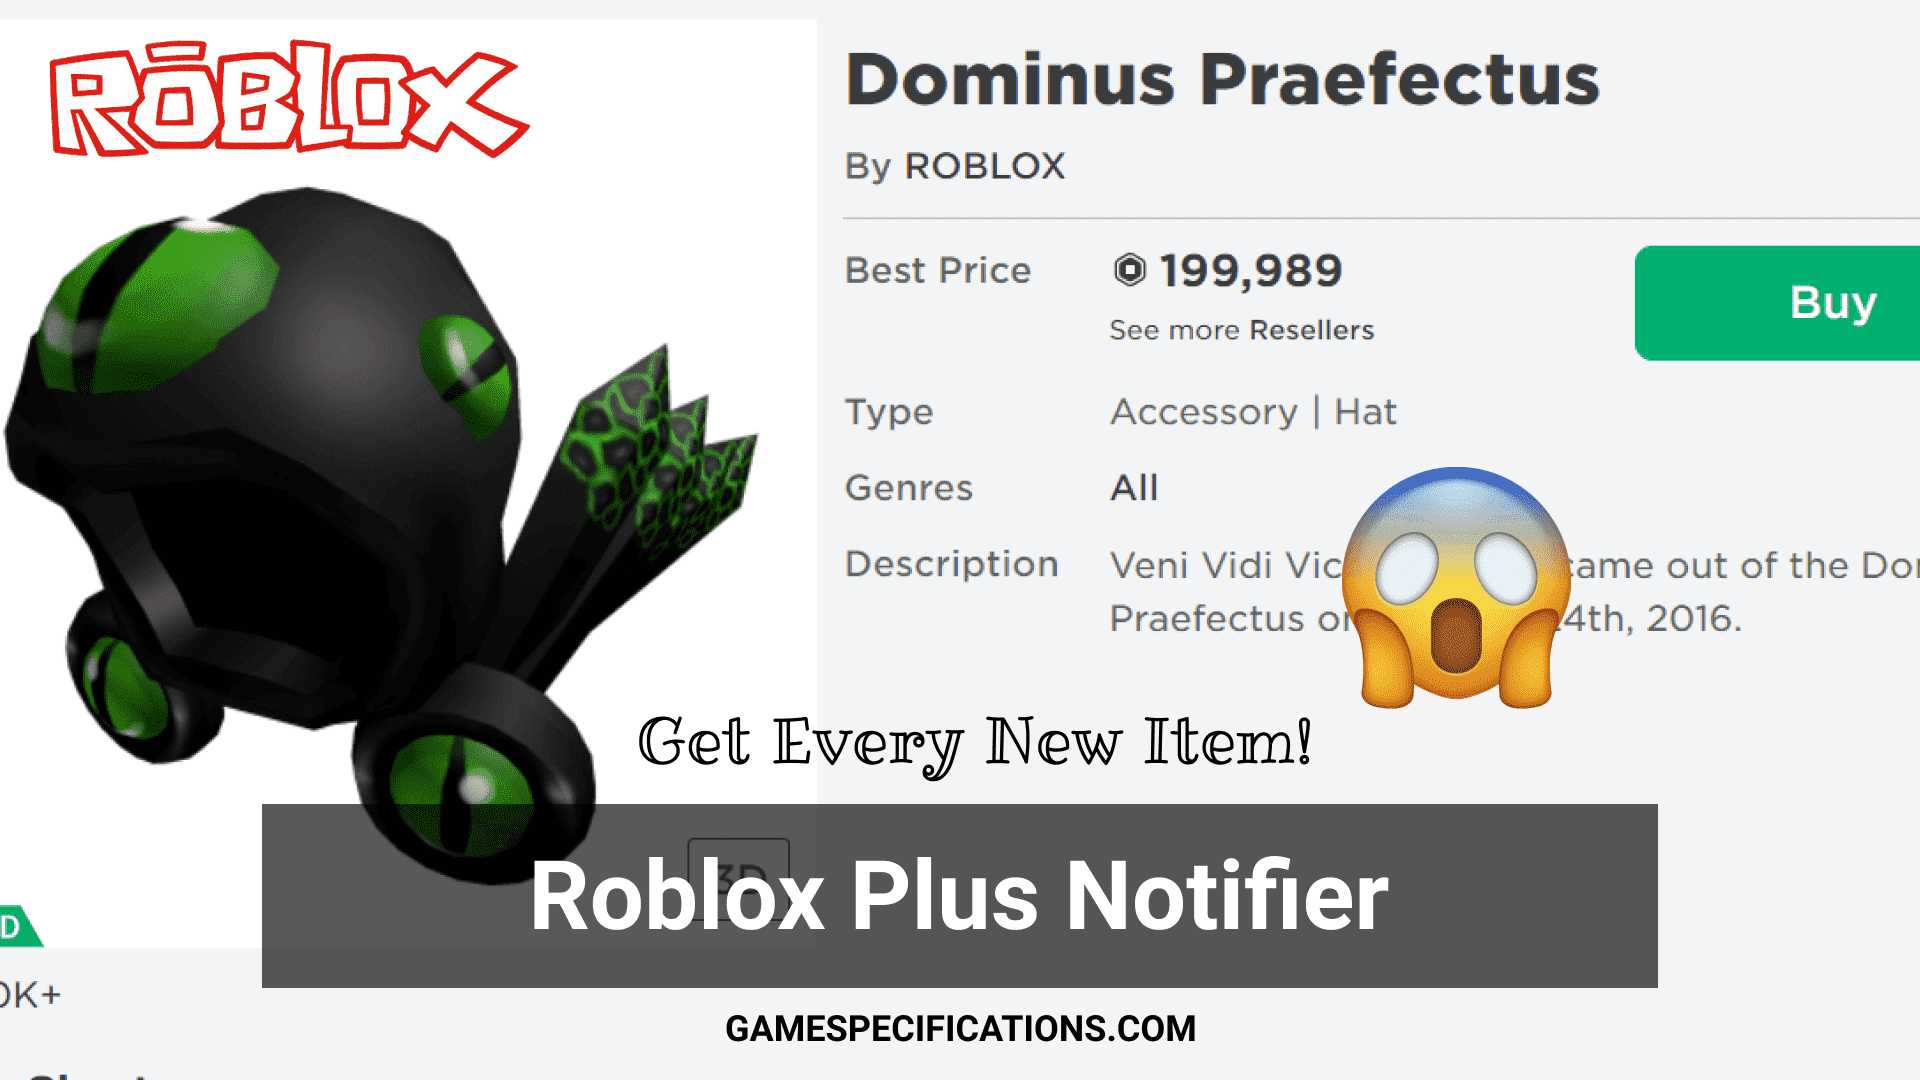 How To Use Roblox Plus Notifier To Get The Catalogue Items First 2021 Game Specifications - reddit roblox item notifier 2021